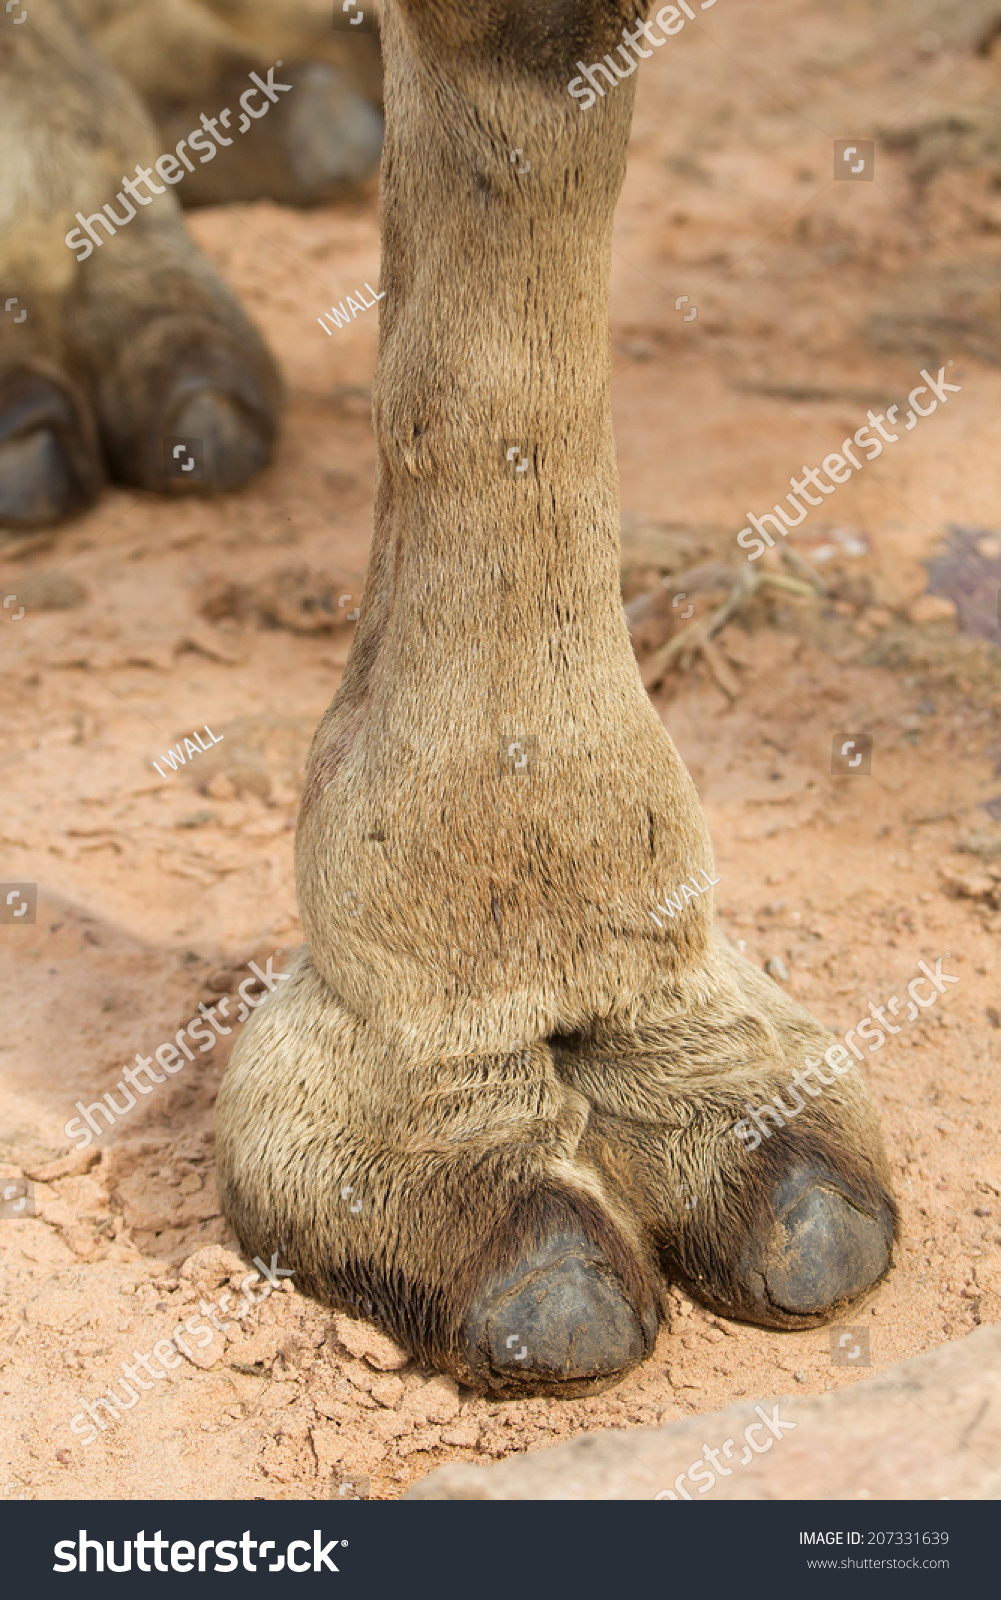 pictures of camel toes